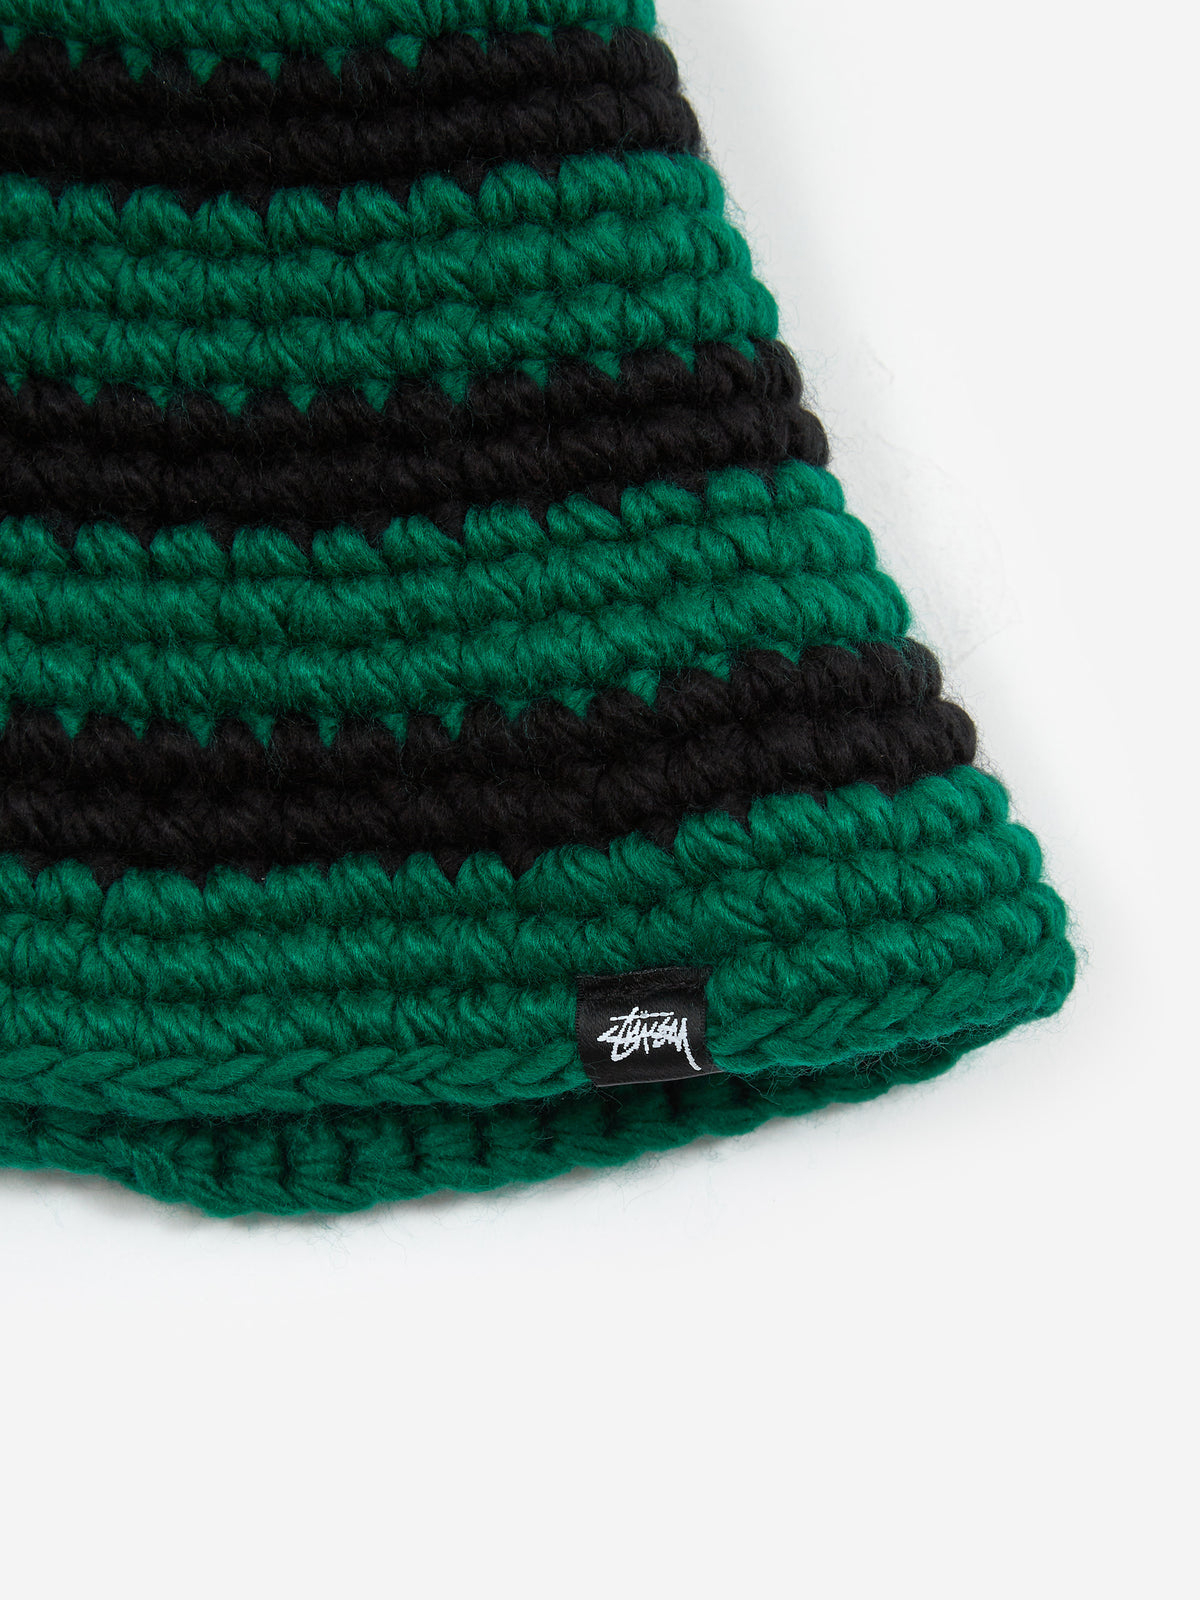 Stussy Swirl Knit Bucket Hat - Forest Stussy Explore the World of